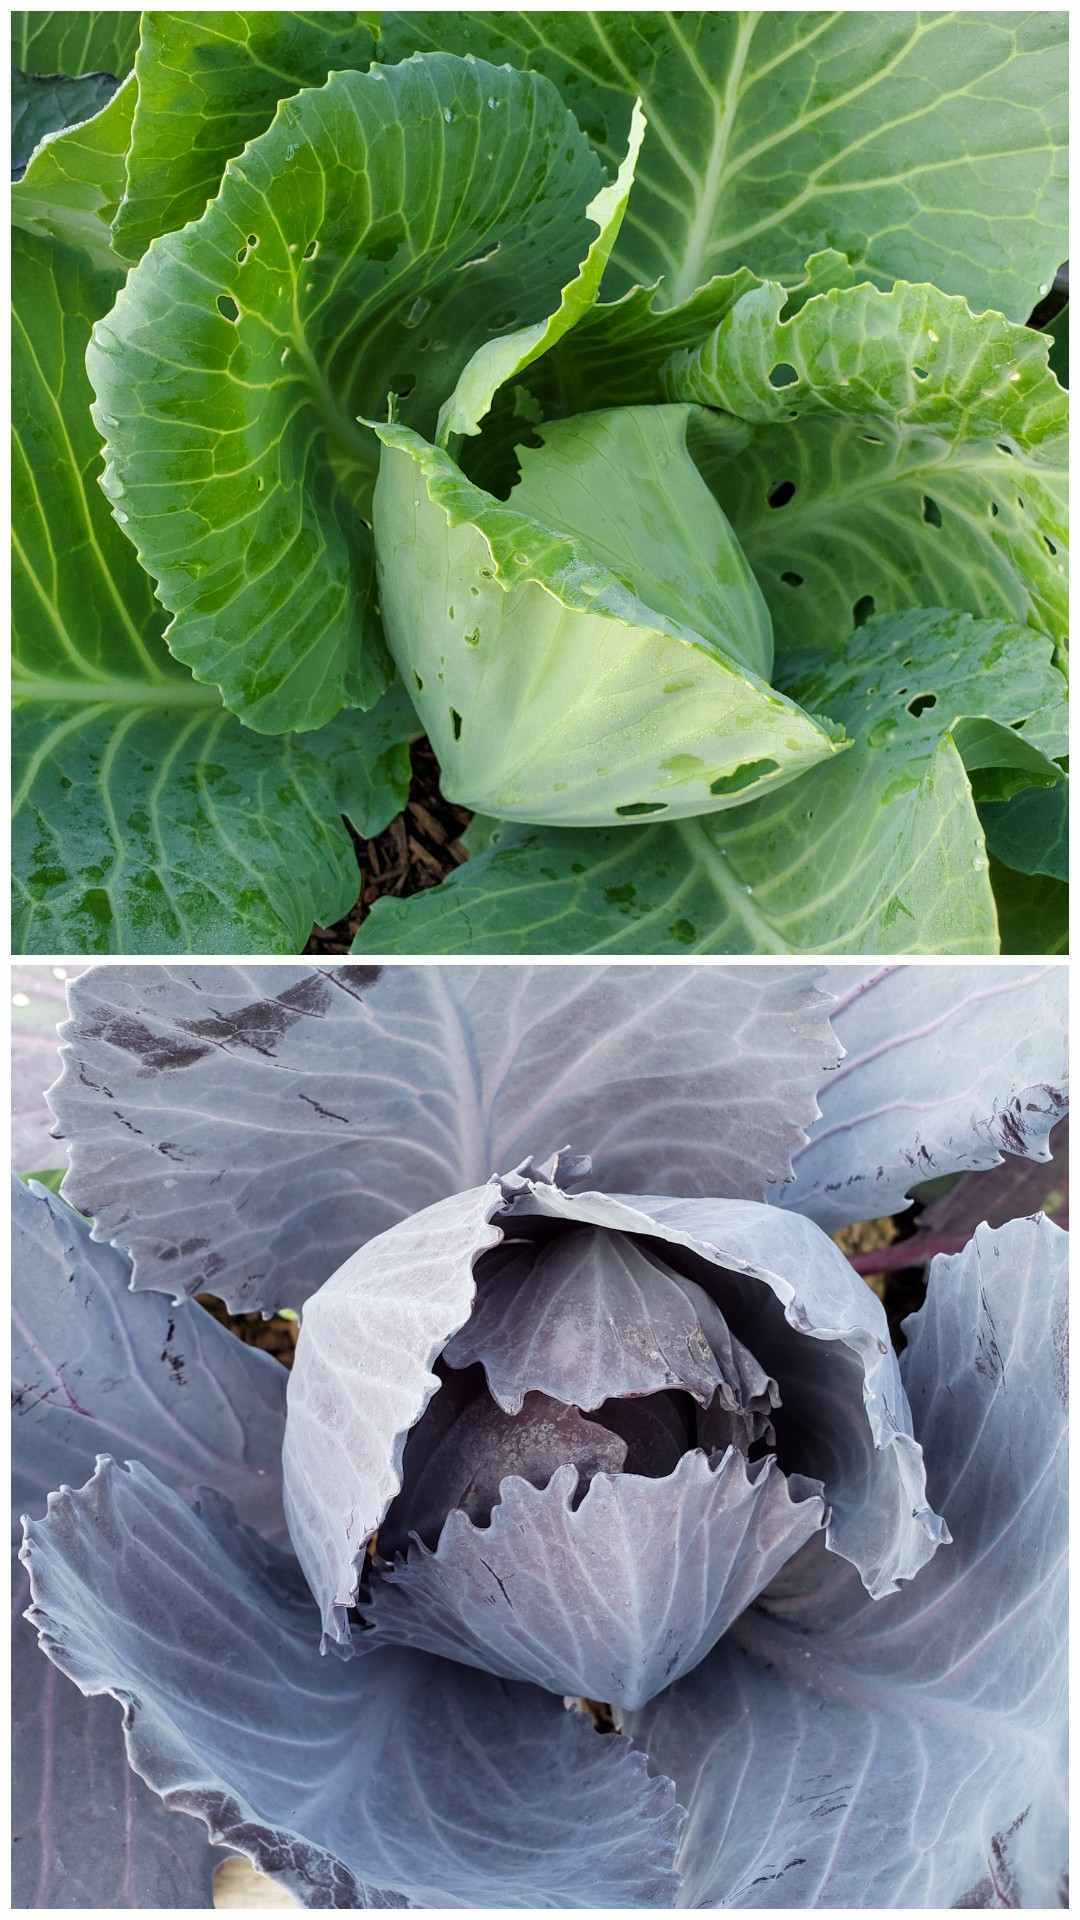 A two way image collage, the first image shows a close up of a green cabbage head. There are many holes throughout the various leaves on the plant due to cabbage white caterpillars. The second image shows a close up of a red cabbage head and it does not have any holes in it from cabbage white caterpillars even though it is planted right next to the green. Cabbage white butterflies lay almost exclusively on the green cabbage because they are drawn to the green color as opposed to the purple or red. 